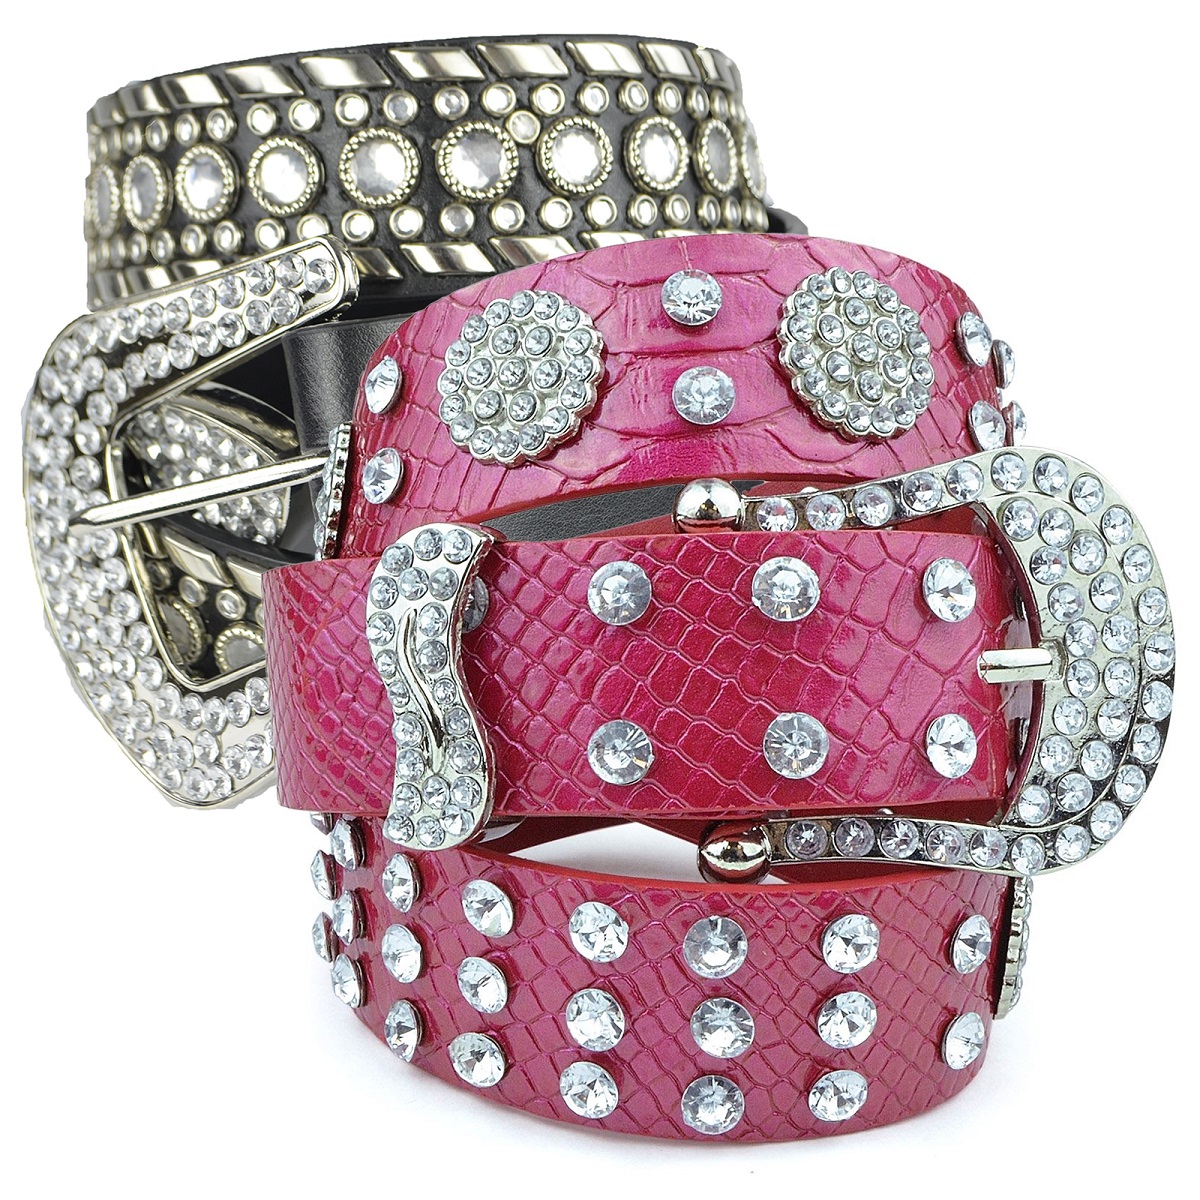 Womens Studded Belts - Western Cowgirl PU Leather Rhinestone Belt with Bling Buckles by Belle Donne